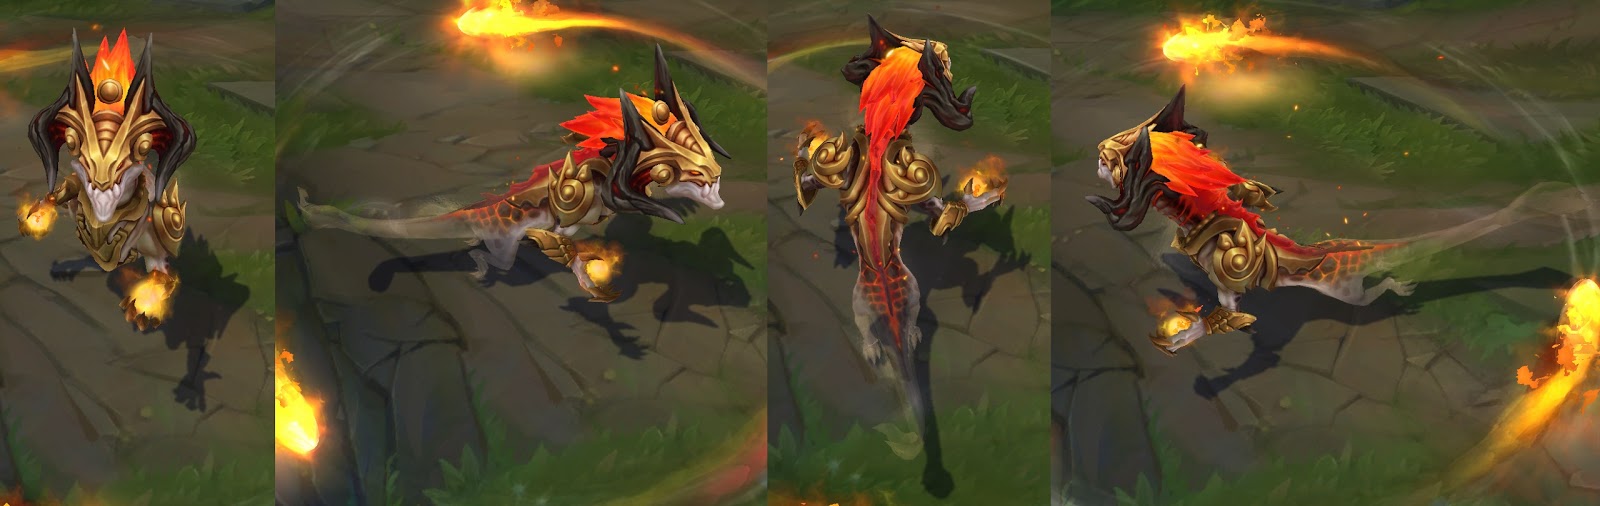 Ashen Lord Aurelion Sol skin for league of legends ingame picture